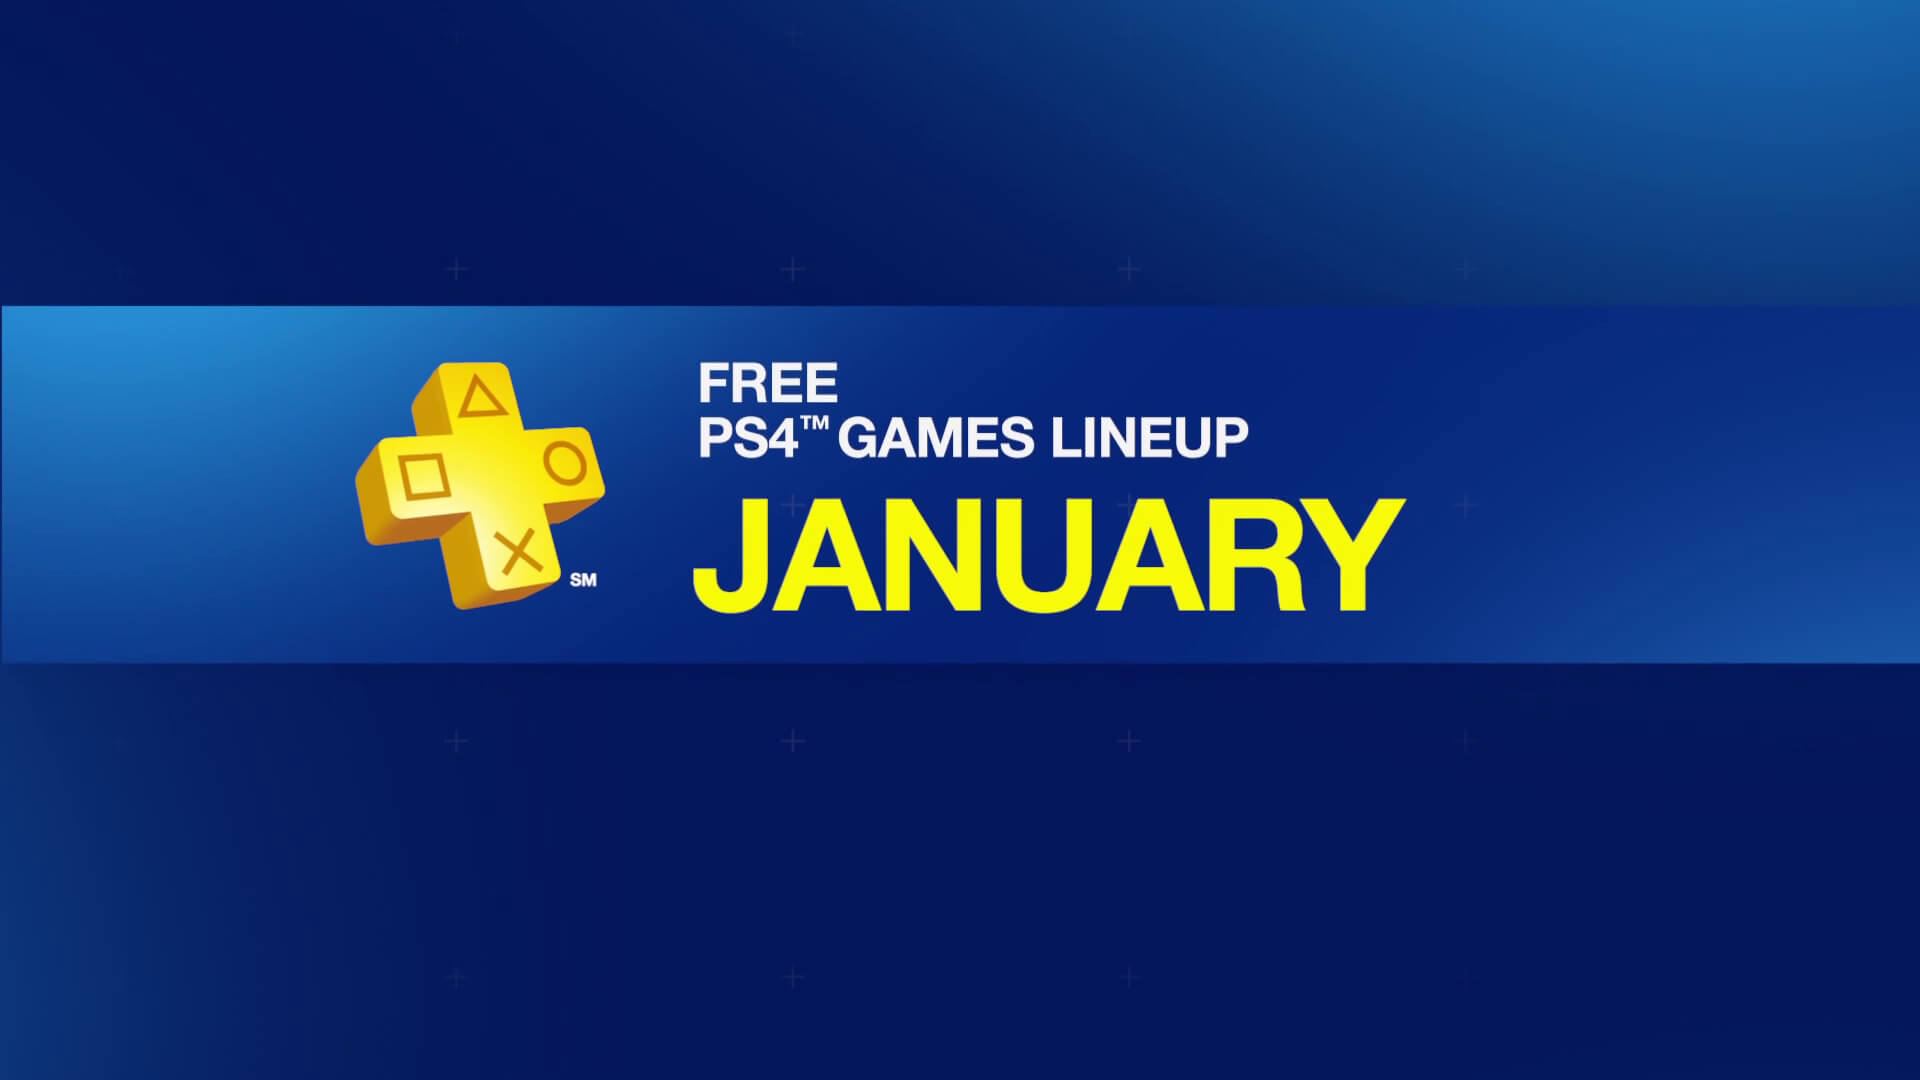 PlayStation Plus Free PS4 Games Lineup January 2016 